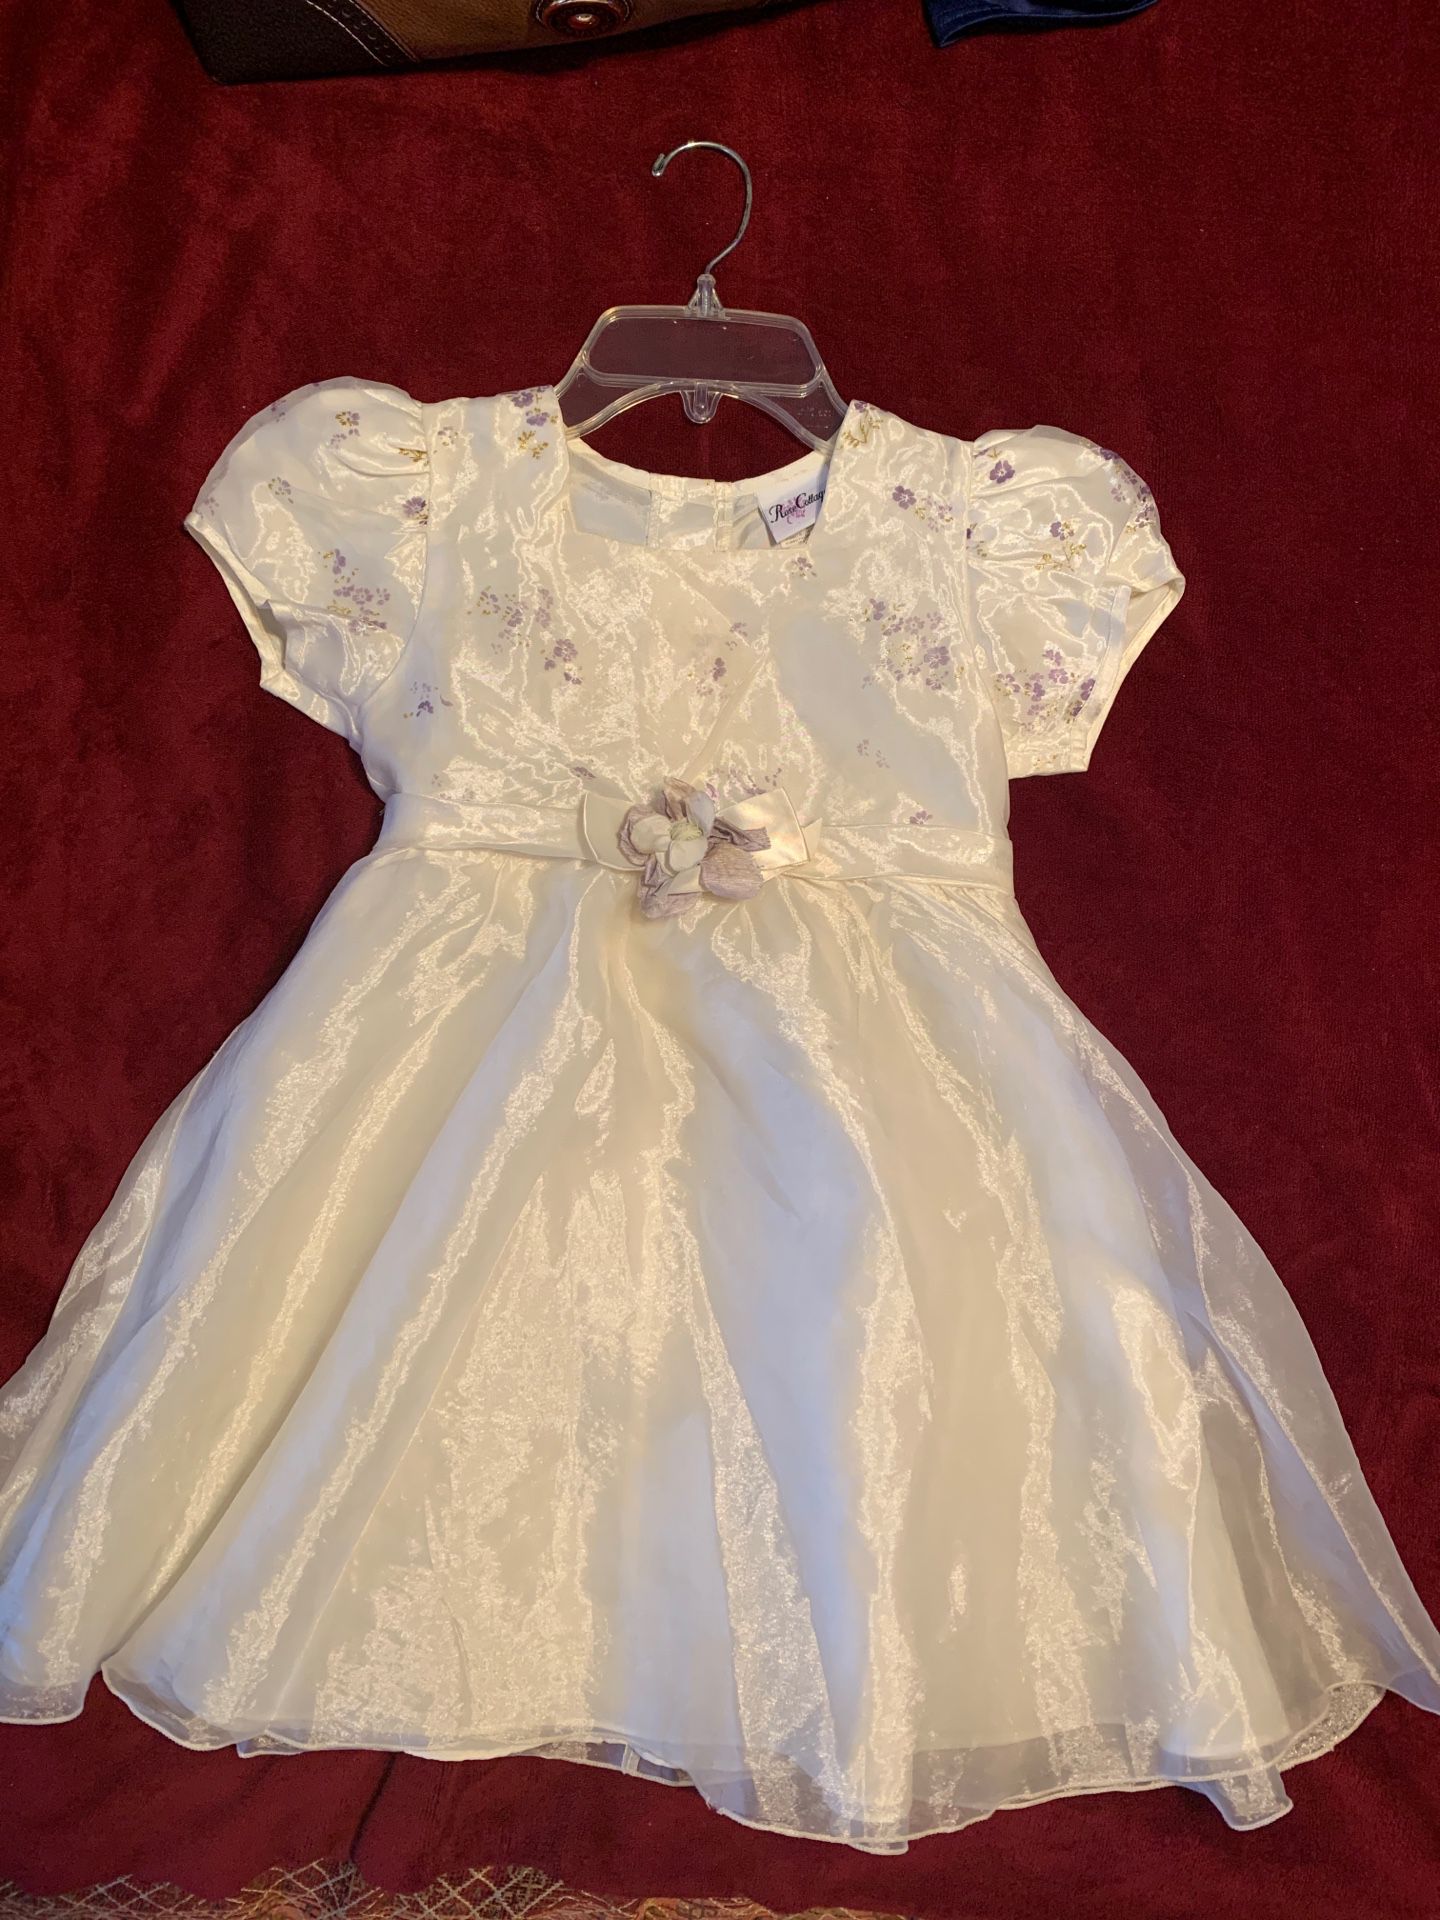 Rose cottage ivory, purple, and gold dress size 7